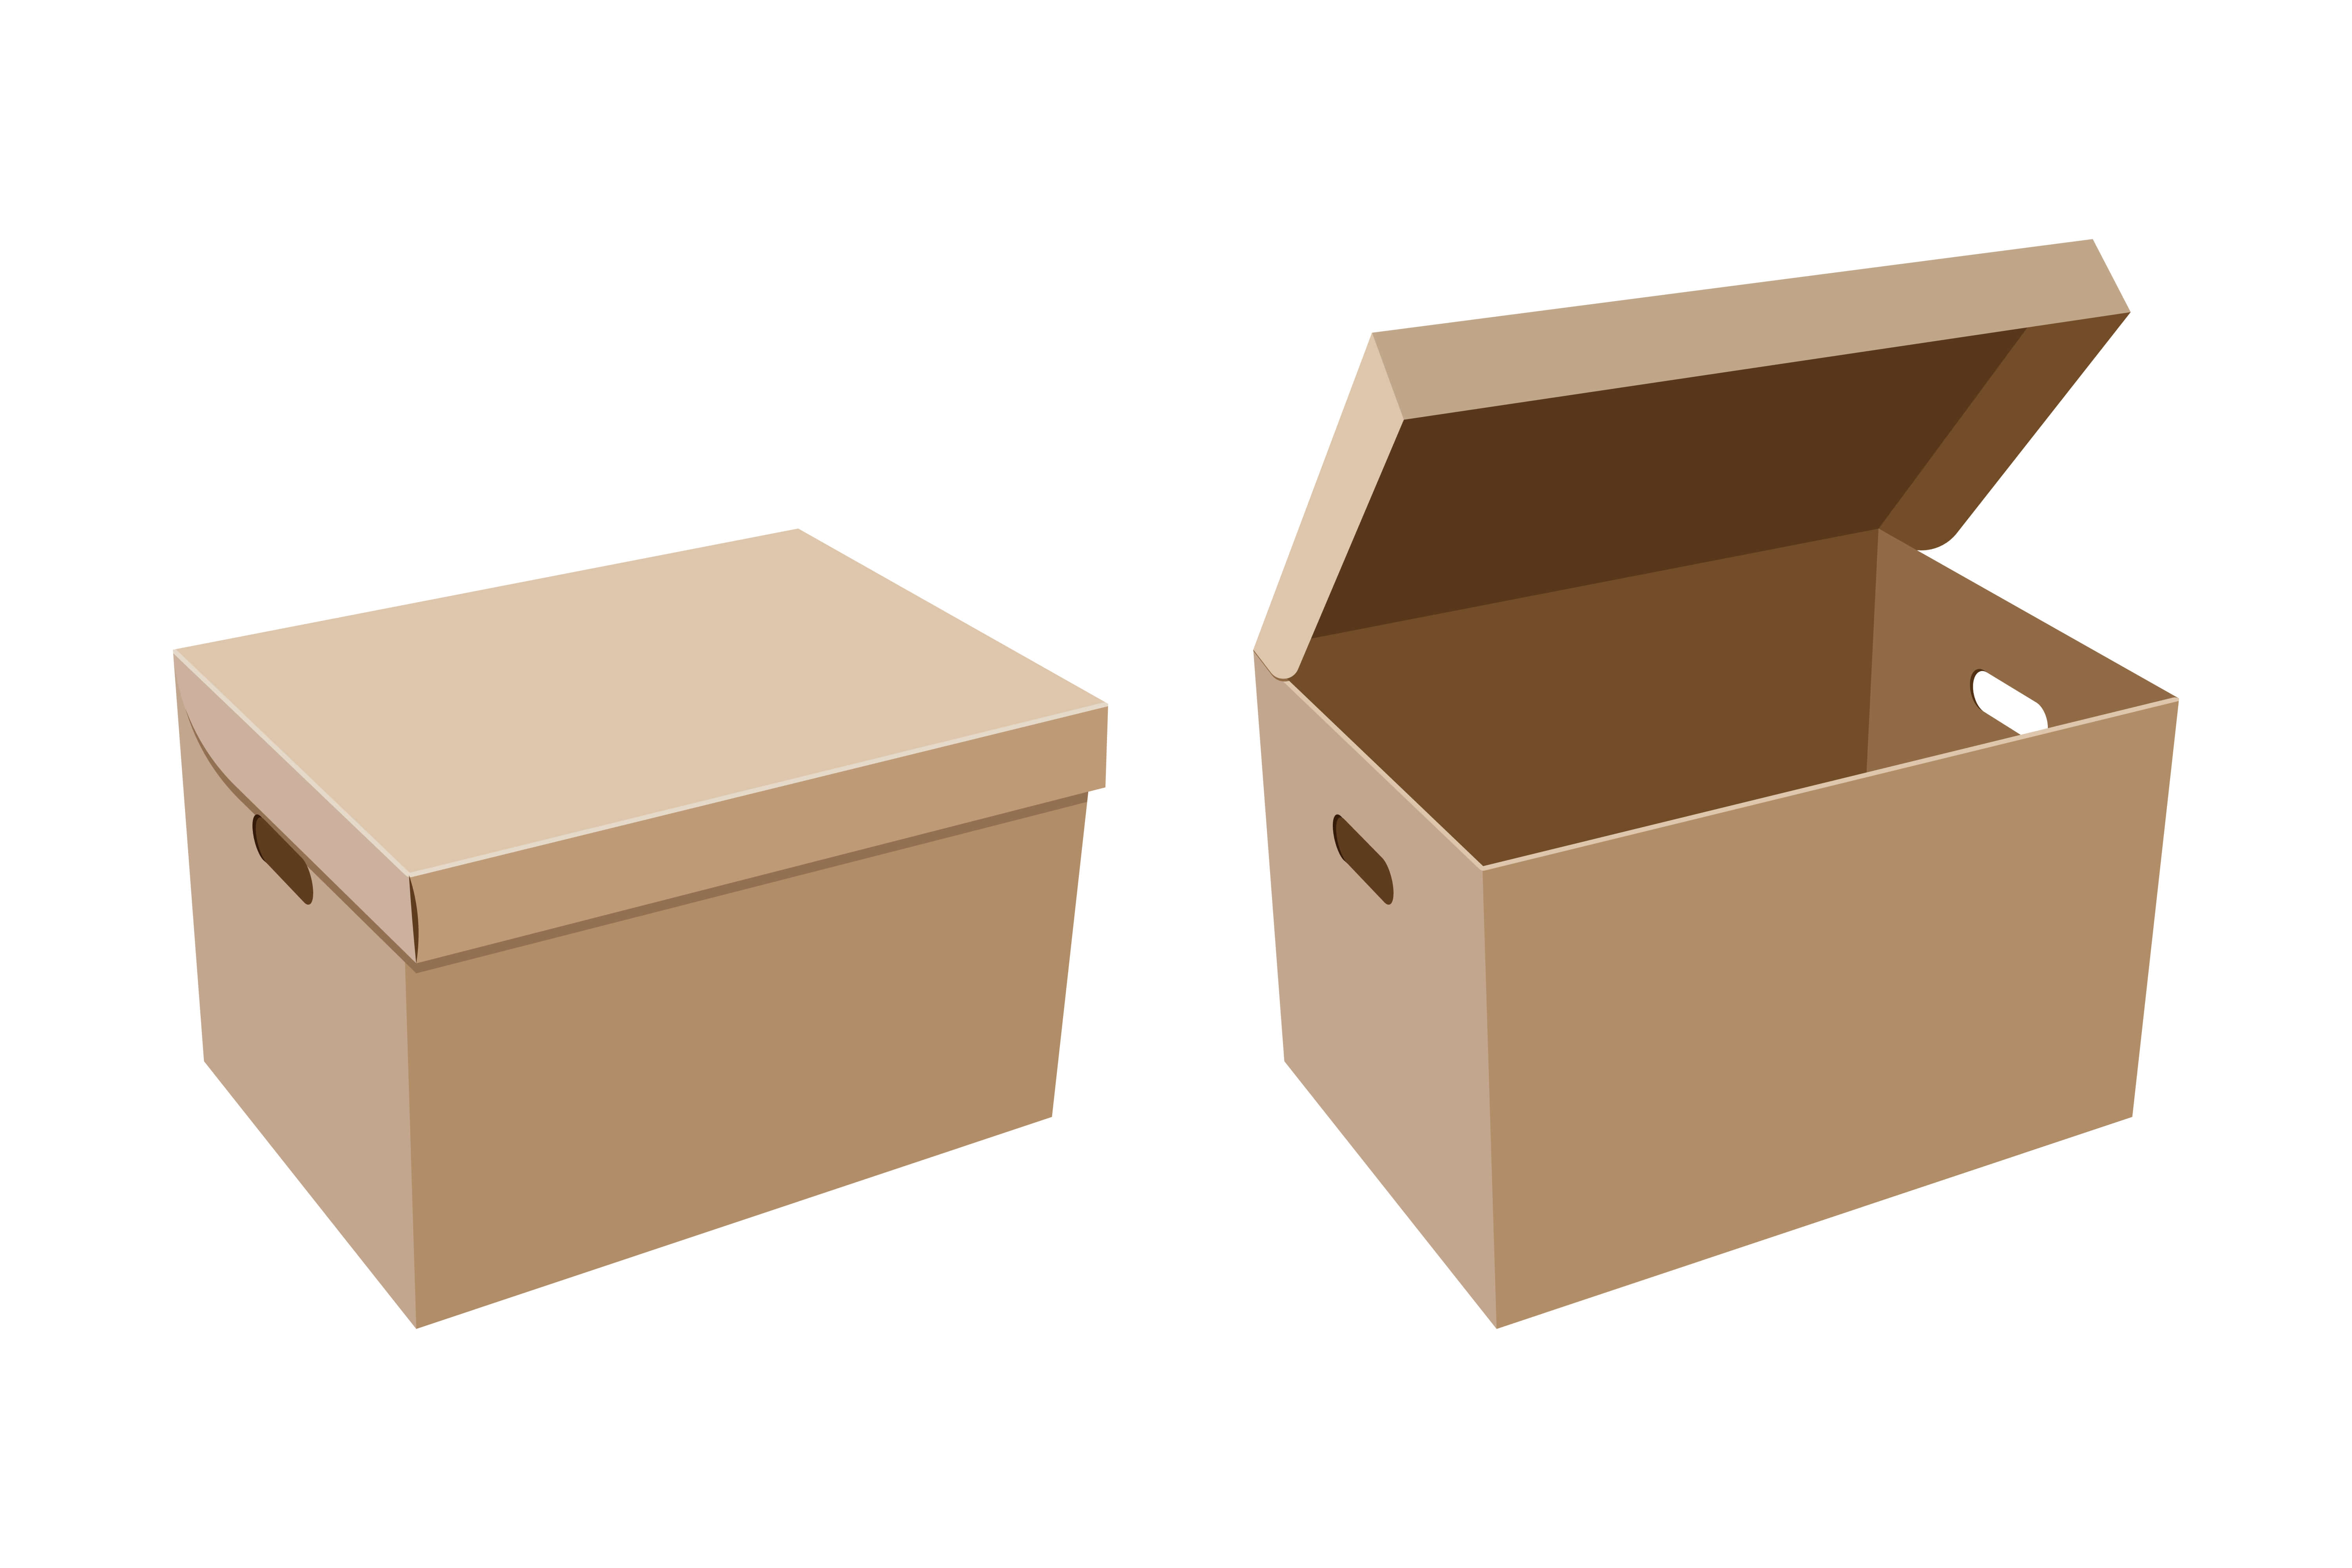 Slotted boxes